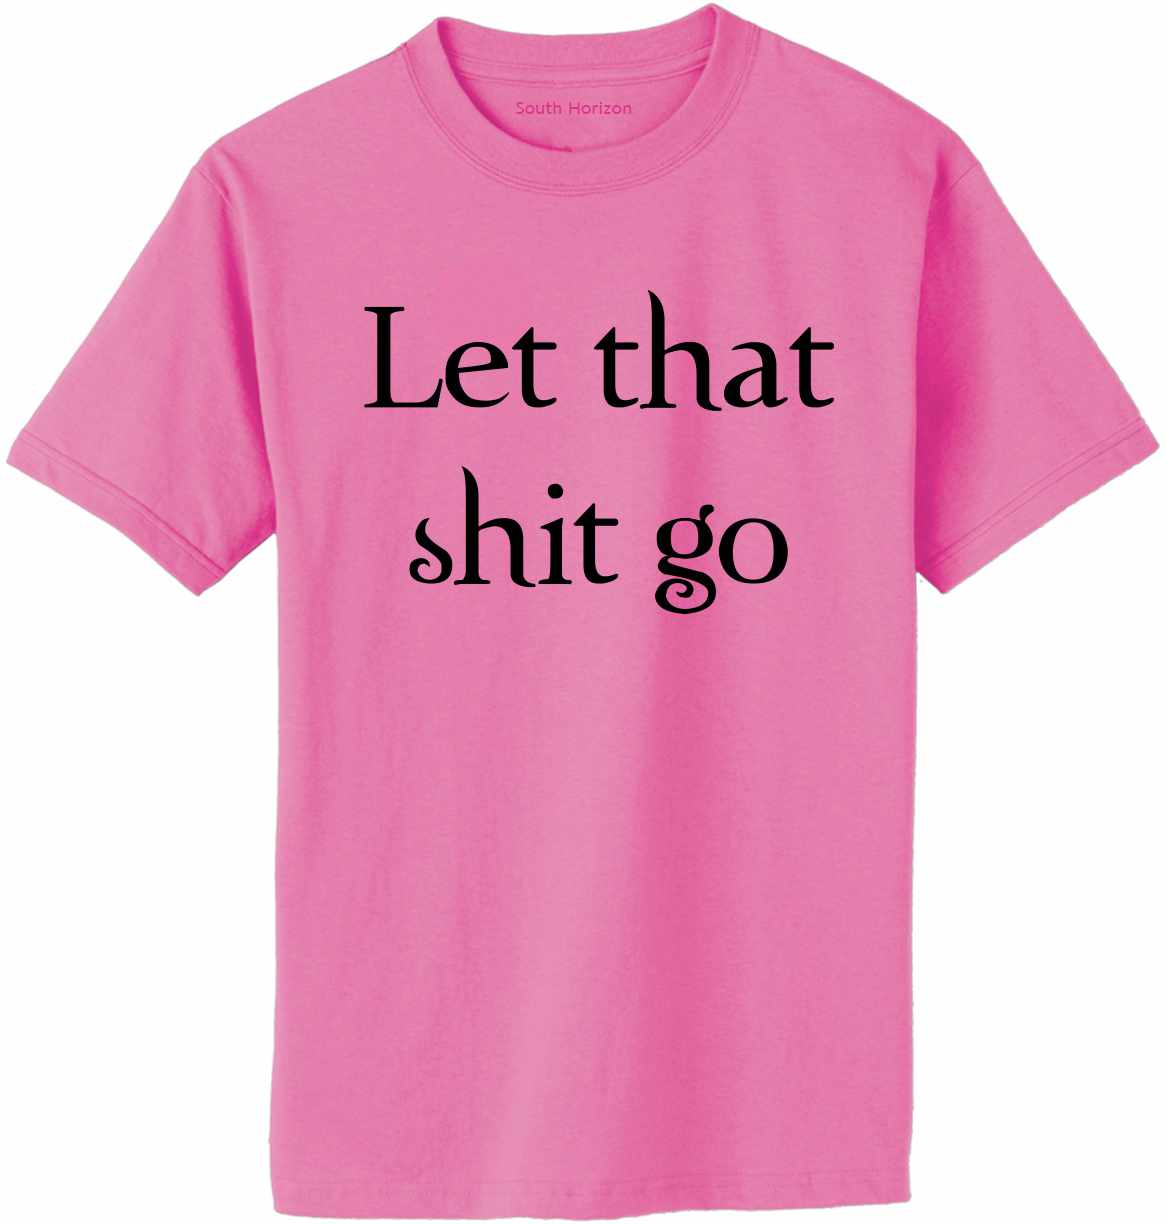 Let that shit go on Adult T-Shirt (#1228-1)